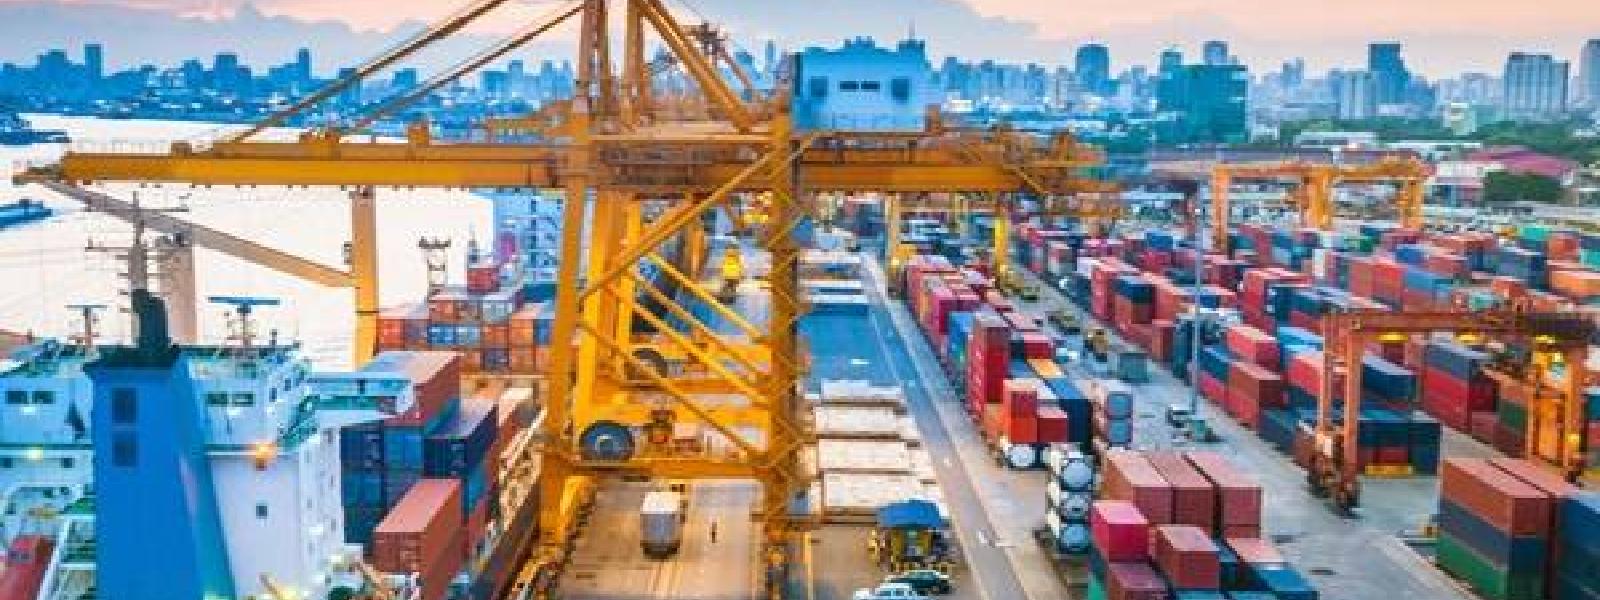 Adani Group signs agreement to develop West Container Terminal